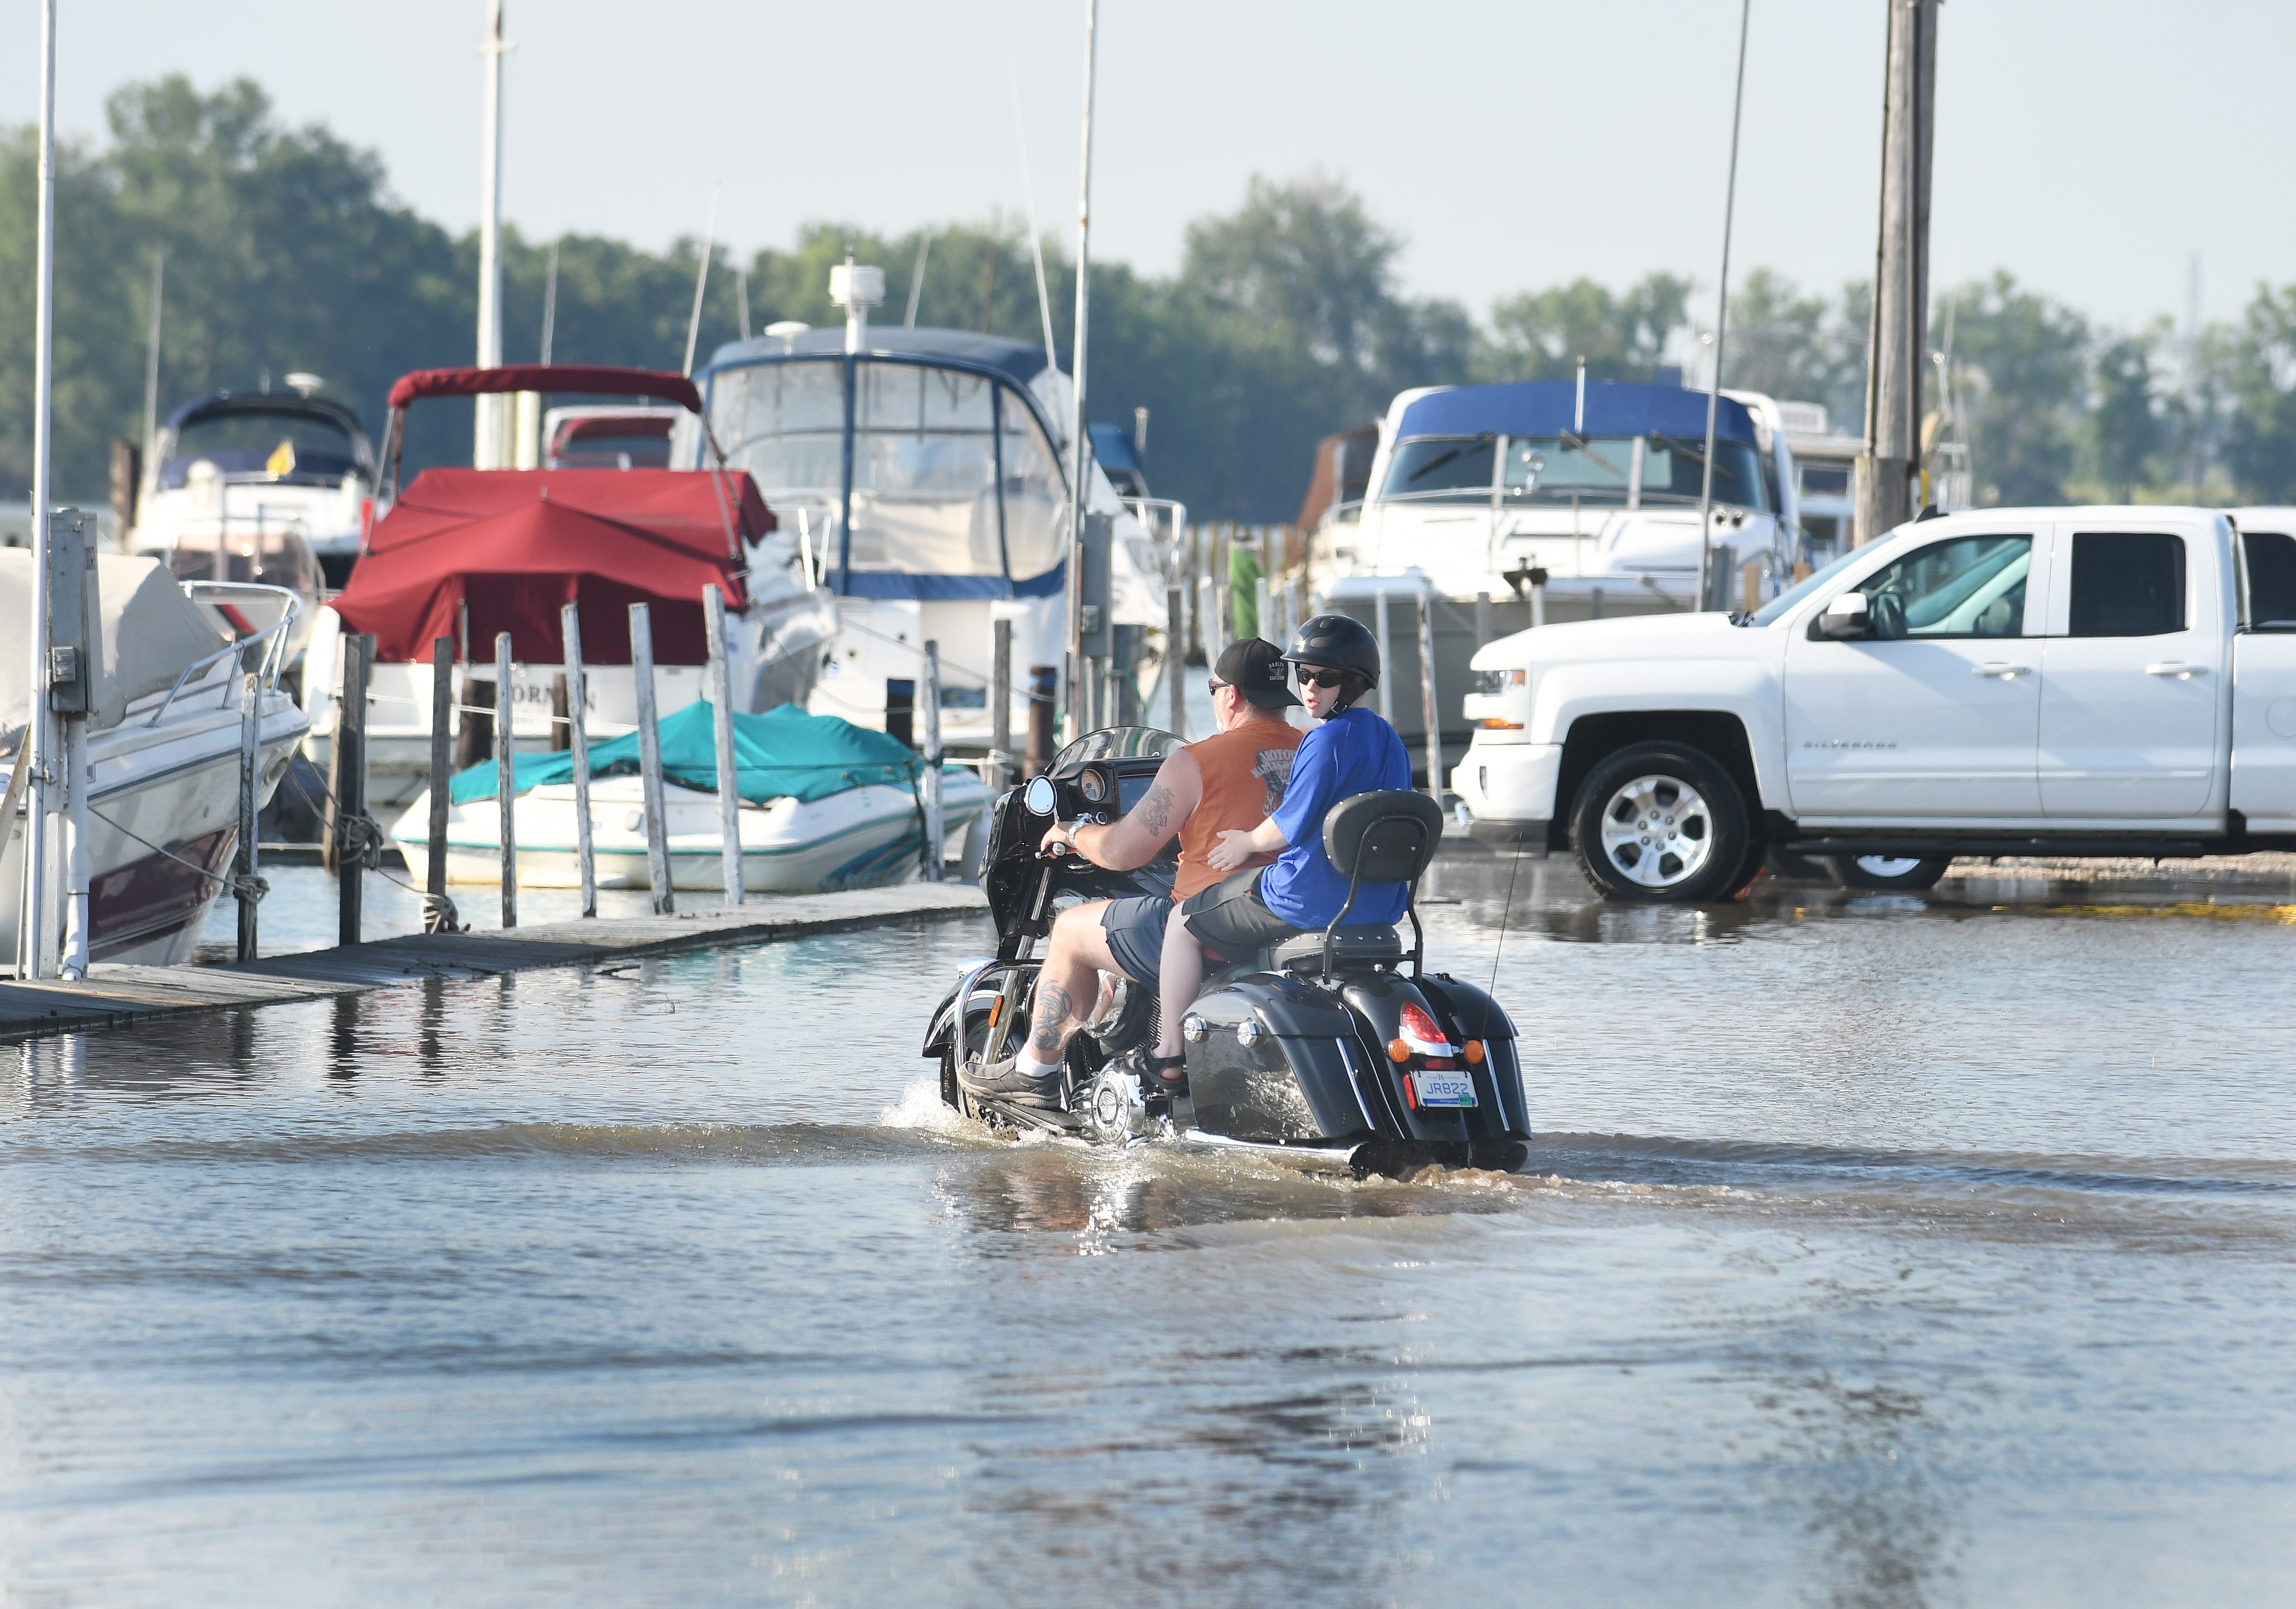 A motorcycles and passenger traverse high water on a usually dry parking lot at the Humbug Marina in Gibralter, Michigan on July 1, 2019.